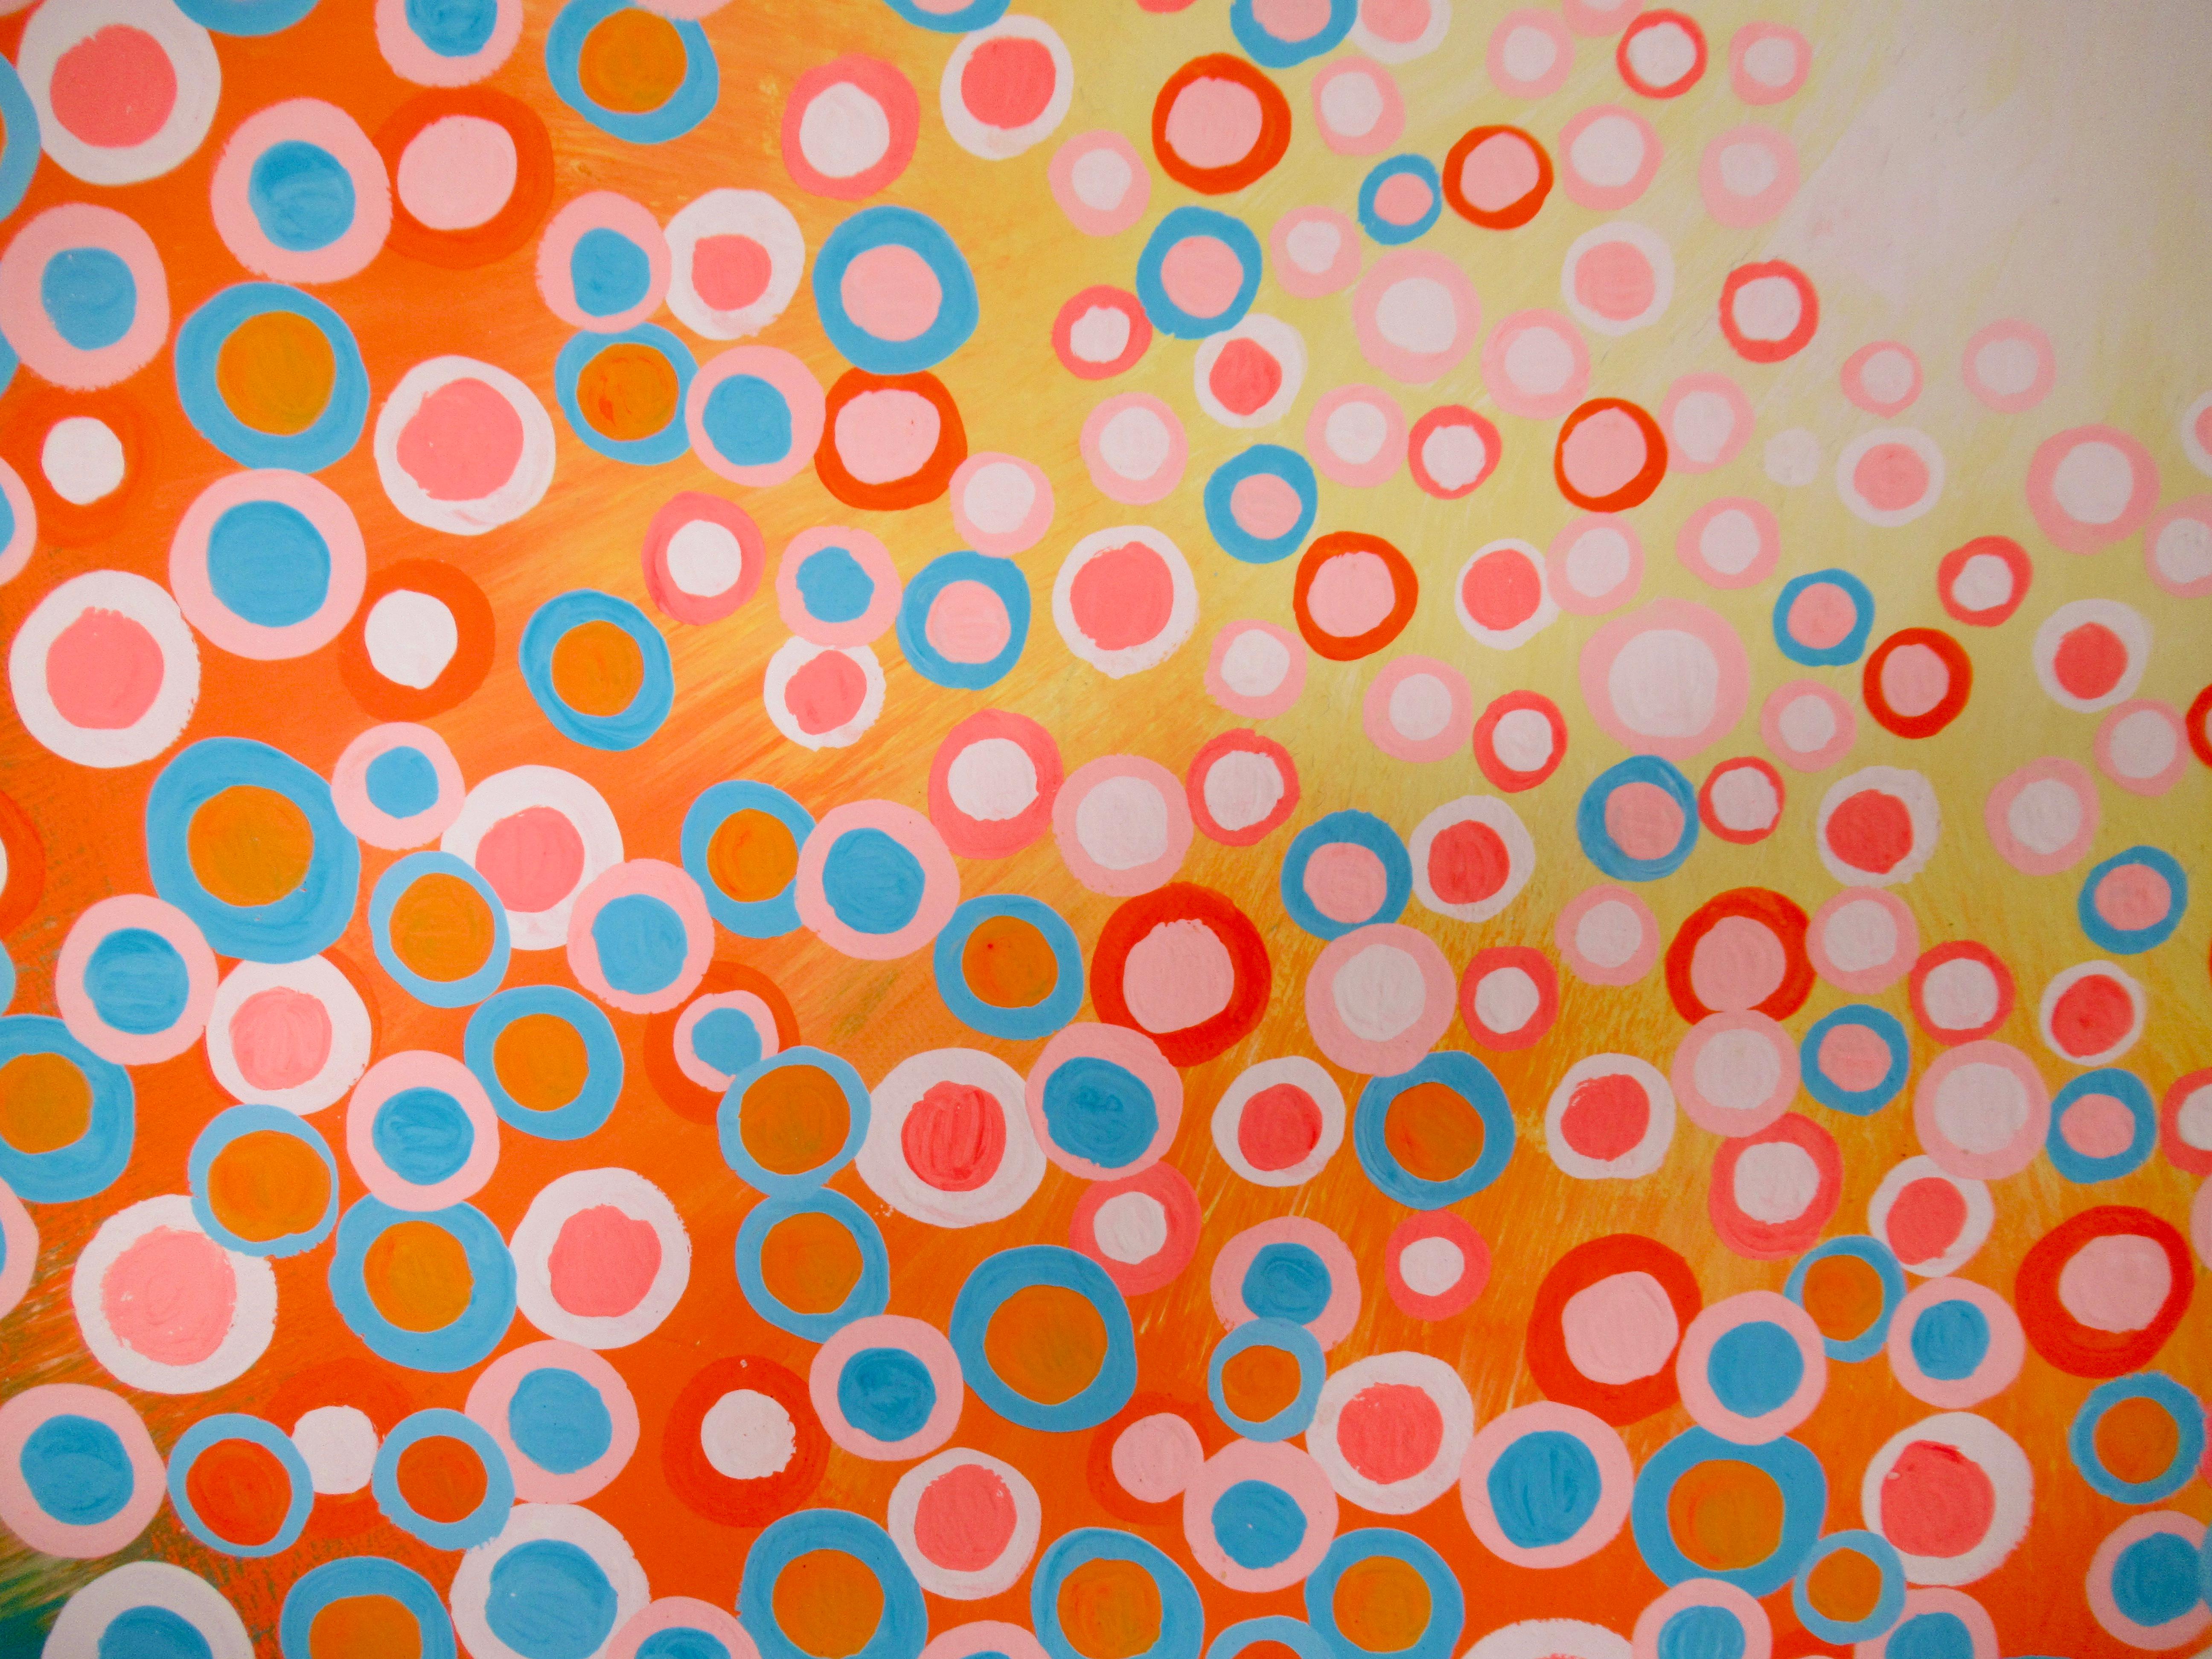 <p>Artist Comments<br>Part of artist Natasha Tayles's signature Circles series. Inspired by warm spring sunny days, Natasha paints sprightly circles in orange, yellow, salmon, and blue. The orbs spread and gather above a delightfully harmonious